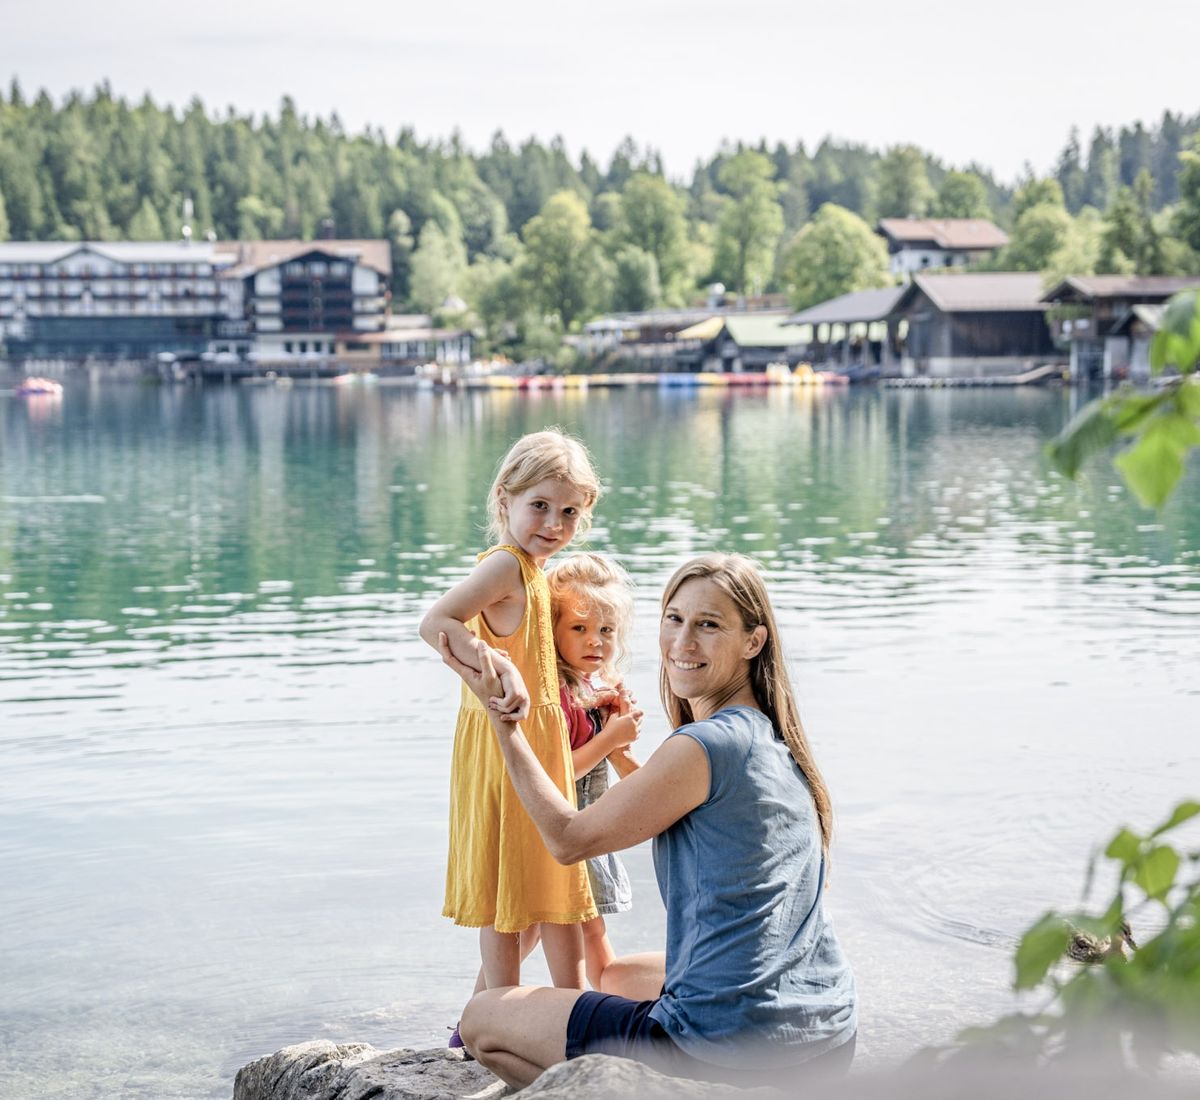 Family-Summer image 1 - Eibsee Hotel